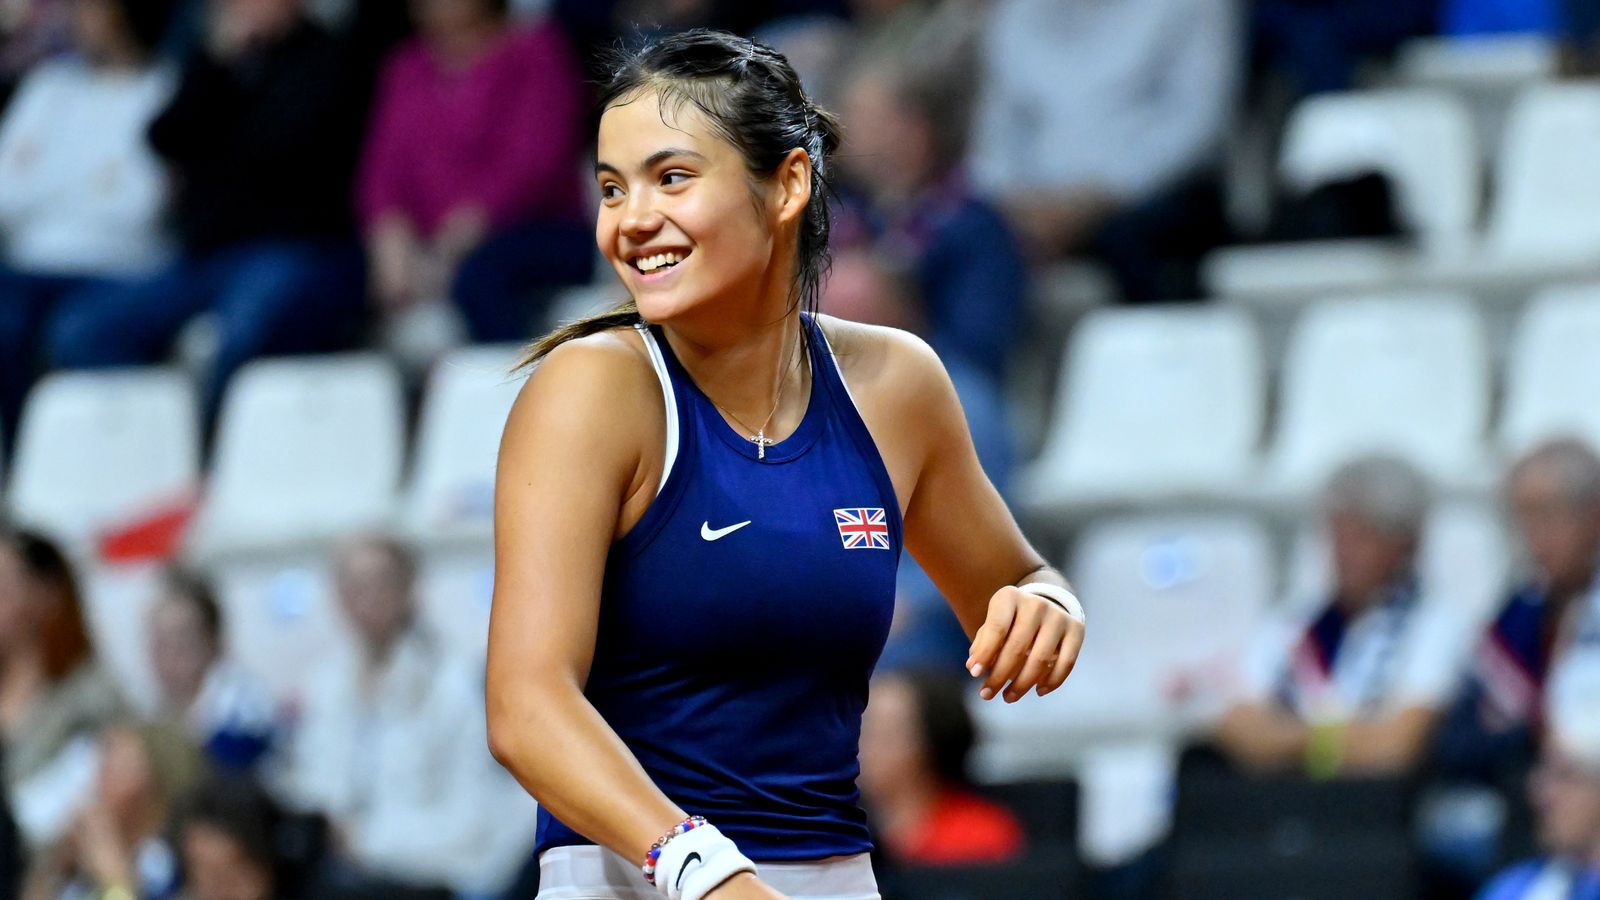 Raducanu and Boulter Propel Team GB to Victory over France in Billie Jean King Cup Qualifiers.